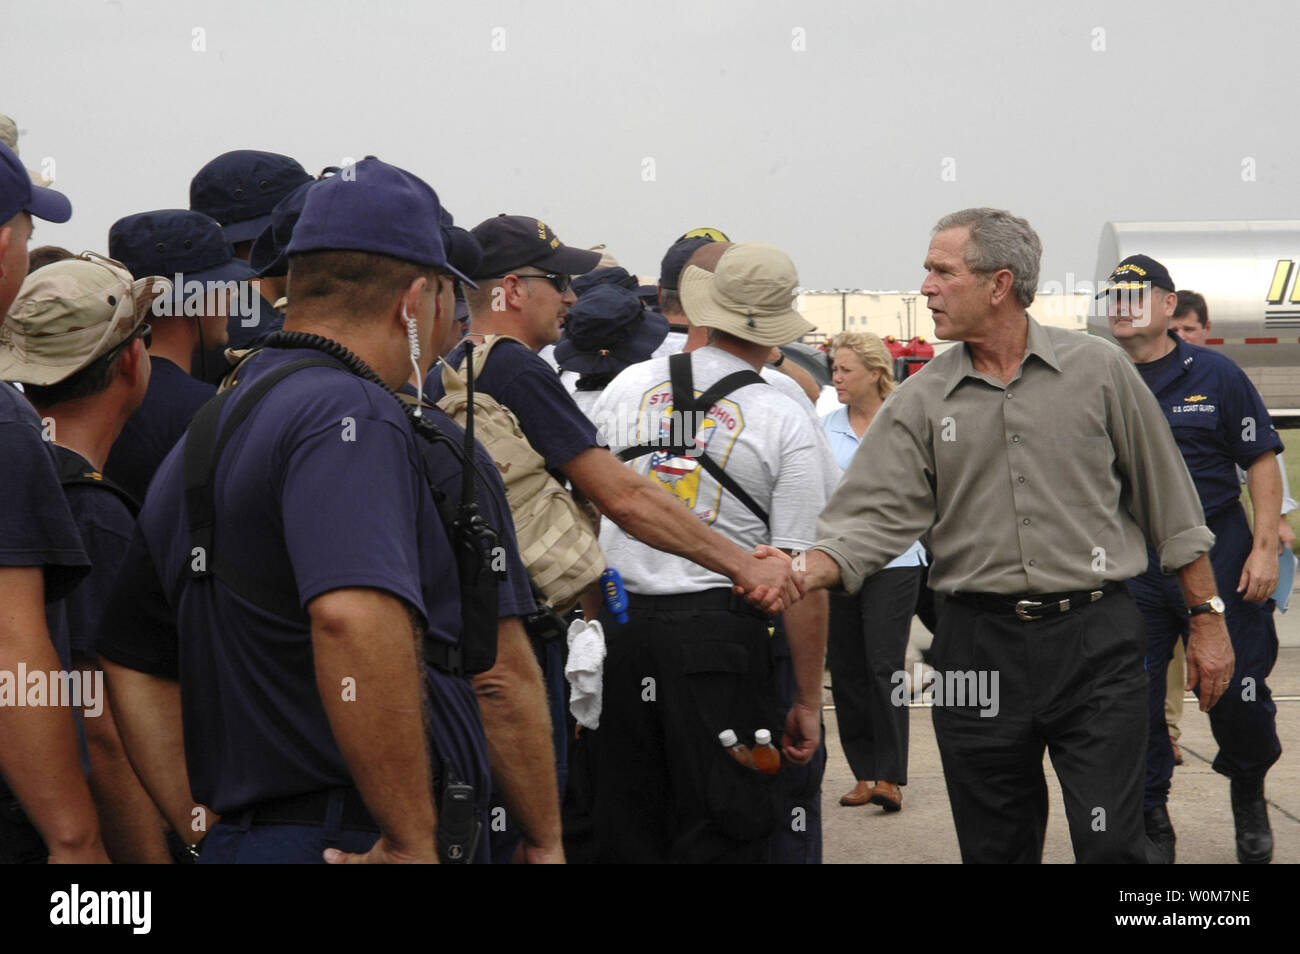 President George W. Bush and Coast Guard Adm. Thad Allen visit with Coast Guard and Joint Task Force personnel at a staging point for Hurricane Rita response in Lake Charles, La., Sept. 27, 2005. (UPI Photo/Mariana O'Leary/Coast Guard) Stock Photo